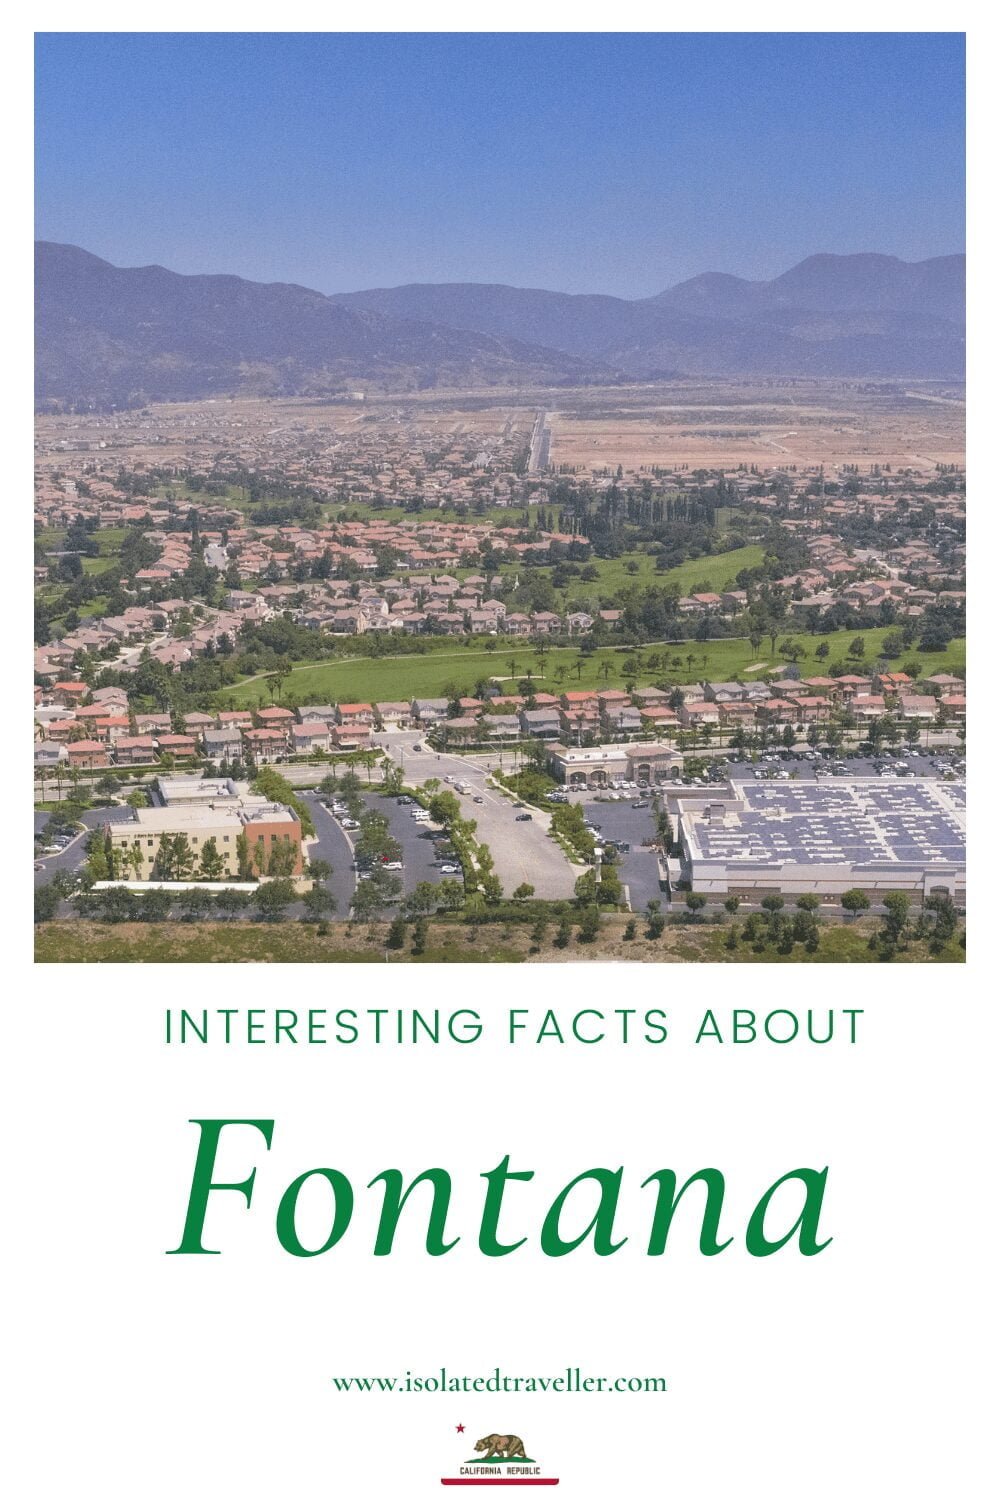 Facts About Fontana